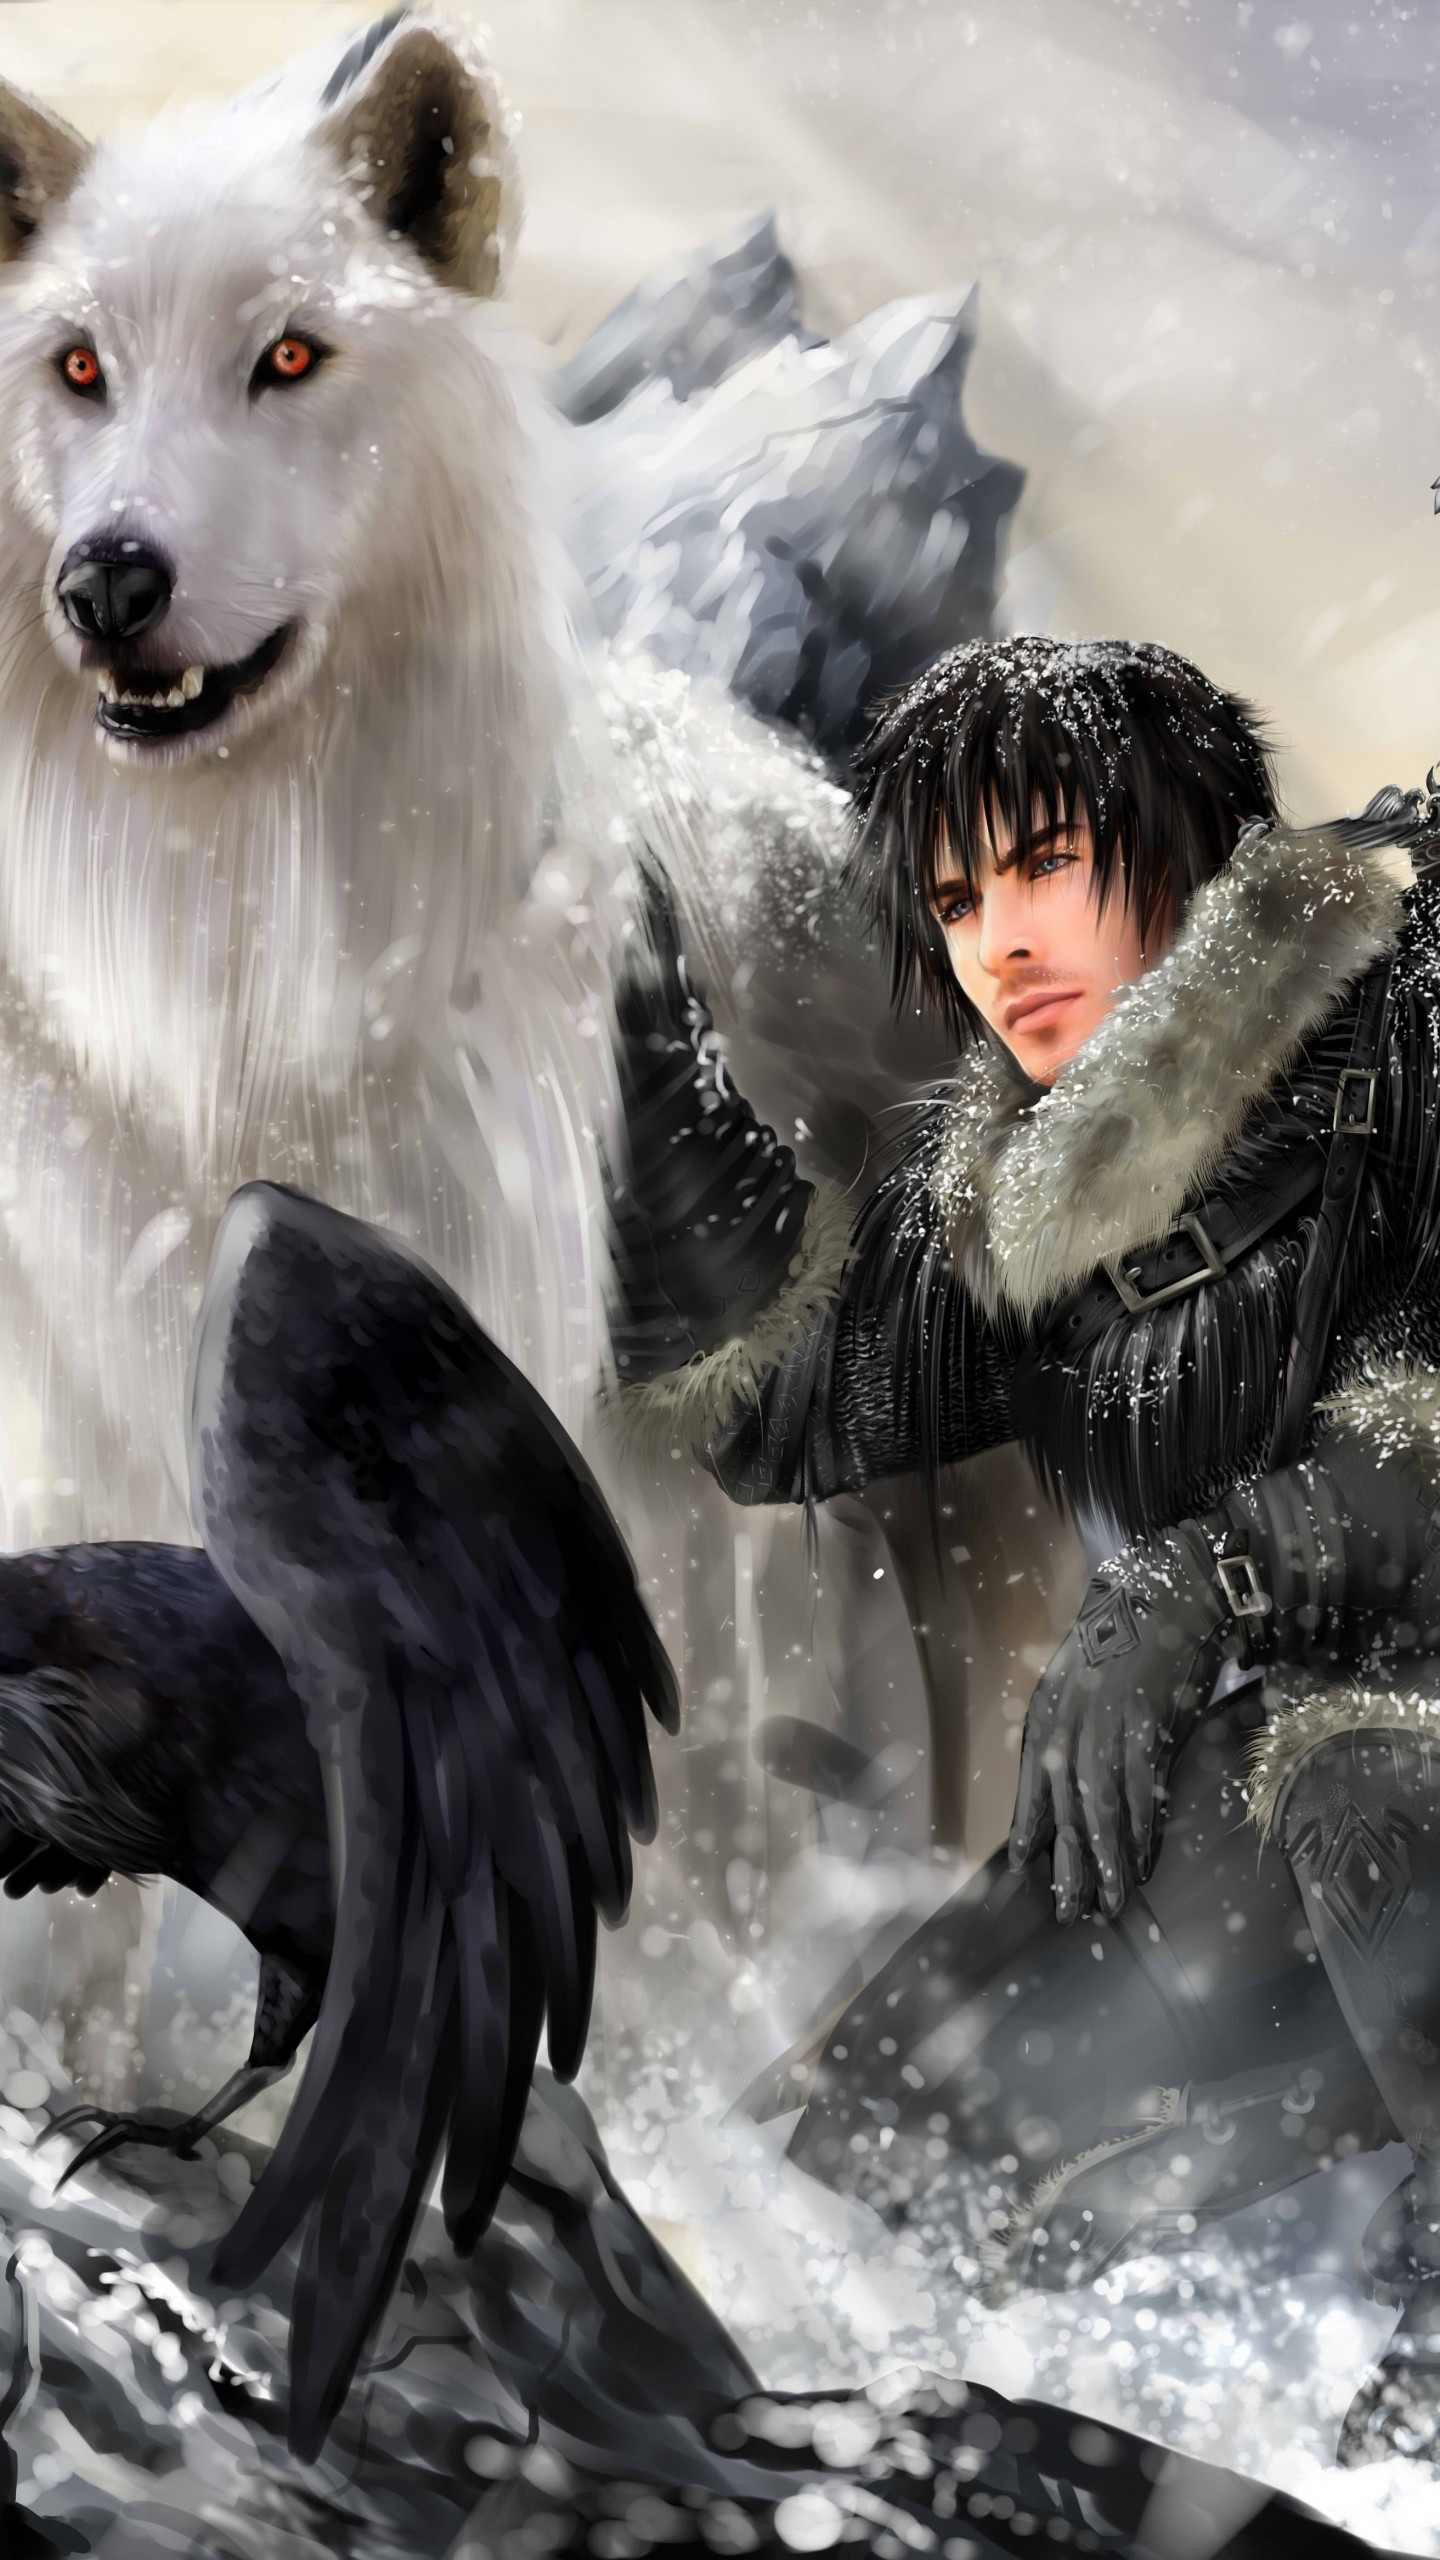 Preview wallpaper the song of ice and fire, game of thrones, jon snow,